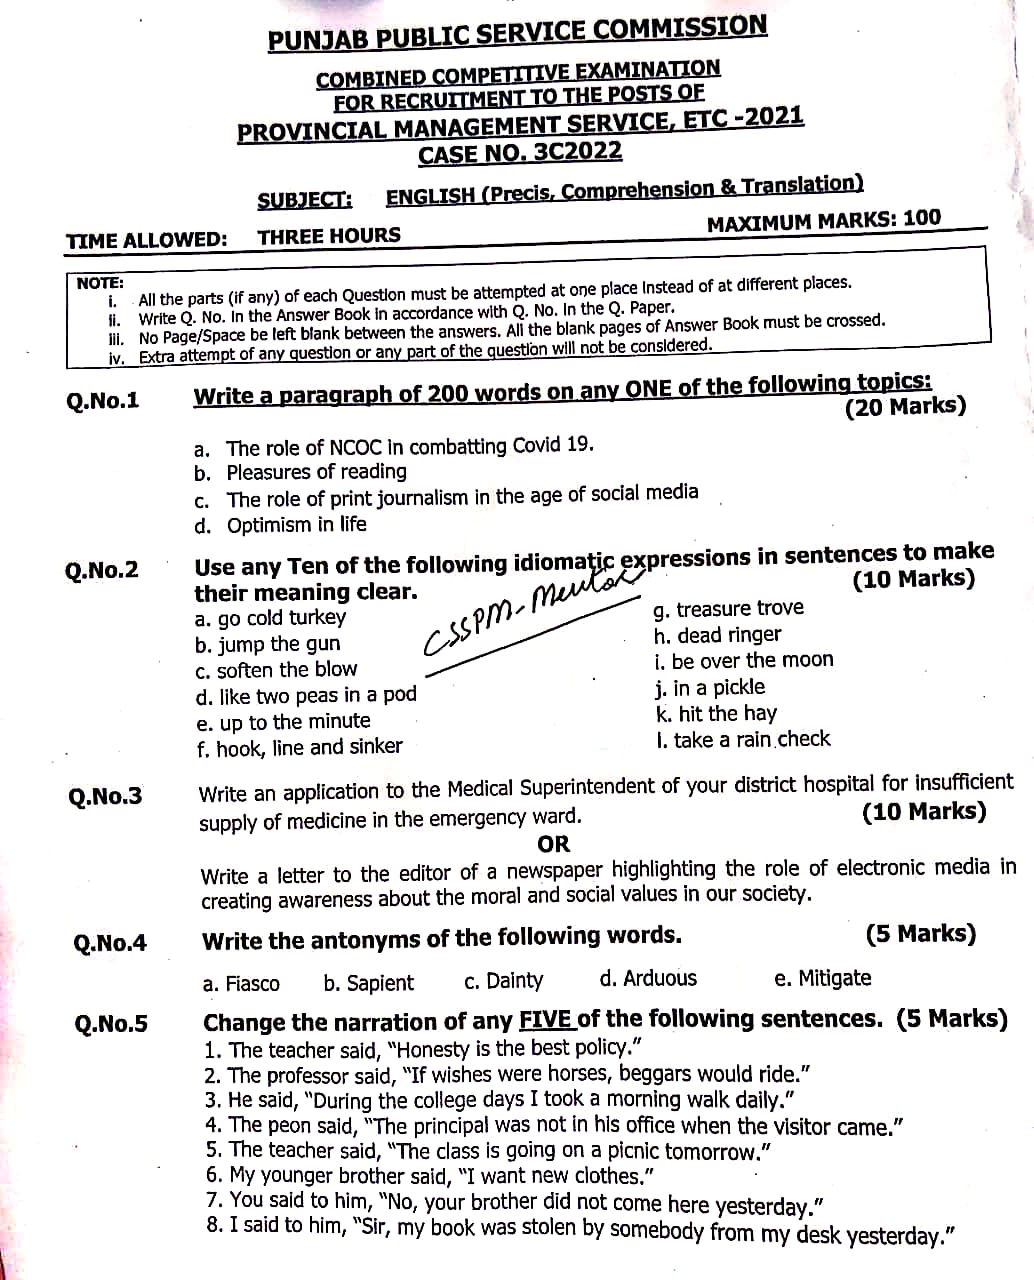 PMS-2022 English precis and composition paper 2021